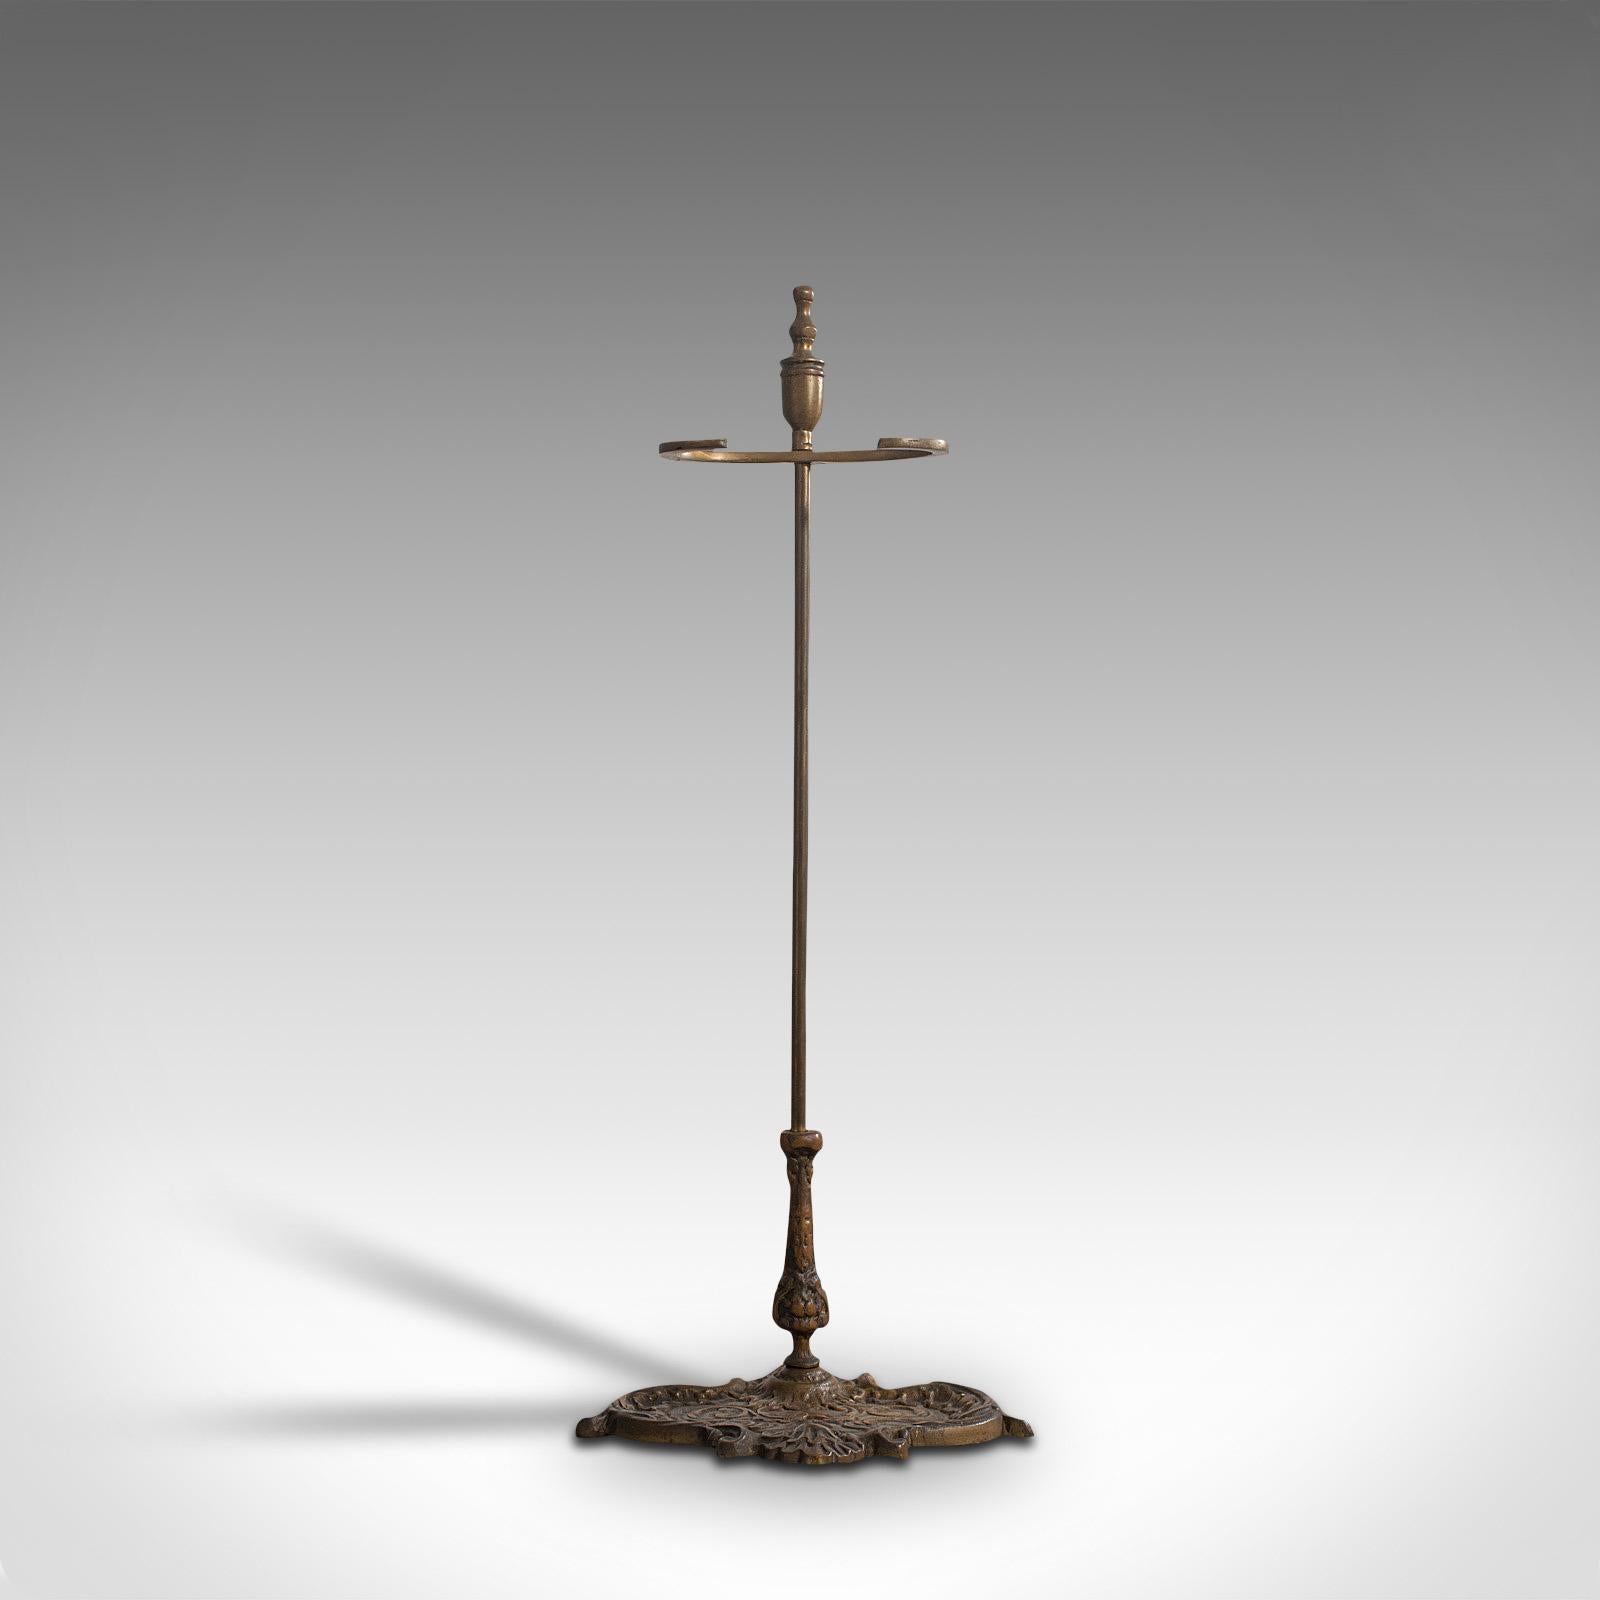 This is an antique stick stand. A French, brass hallway cane or umbrella rack, dating to the late Art Nouveau period, circa 1920.

Elaborate early 20th century French taste
Displaying a desirable aged patina
Weathered brass shows appealing